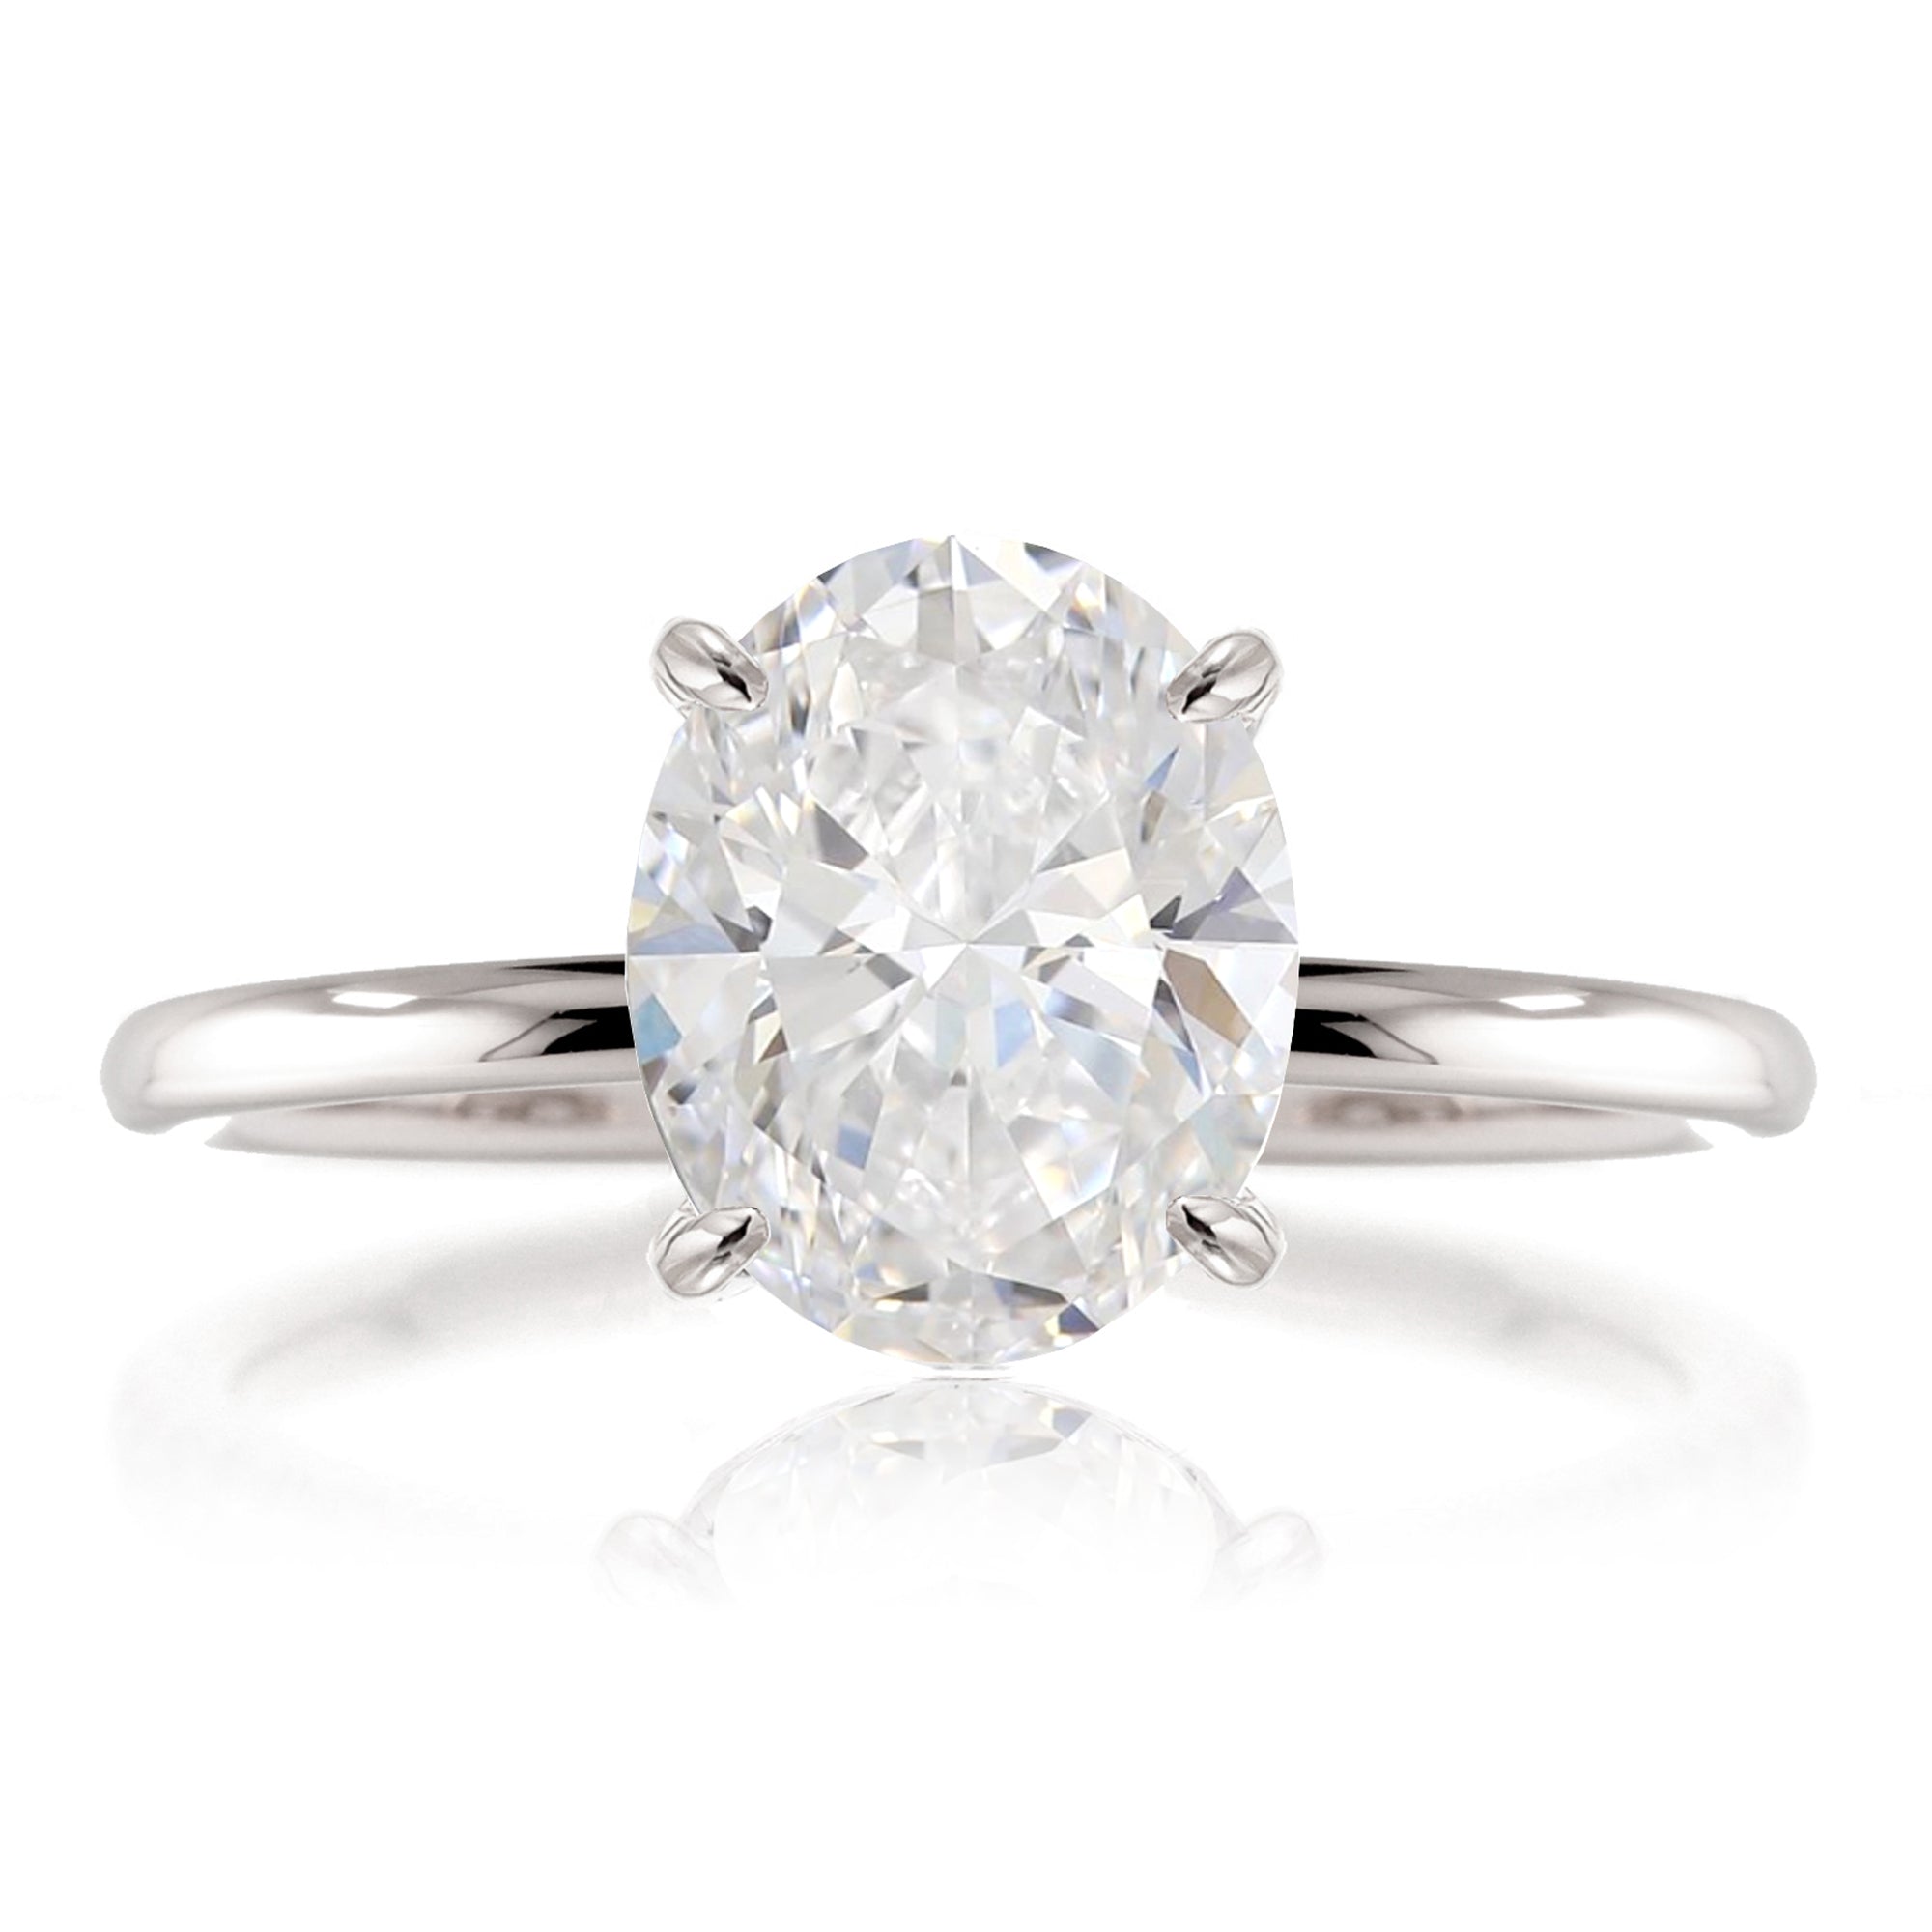 Oval cut lab-grown diamond engagement ring white gold - The Ava solid band